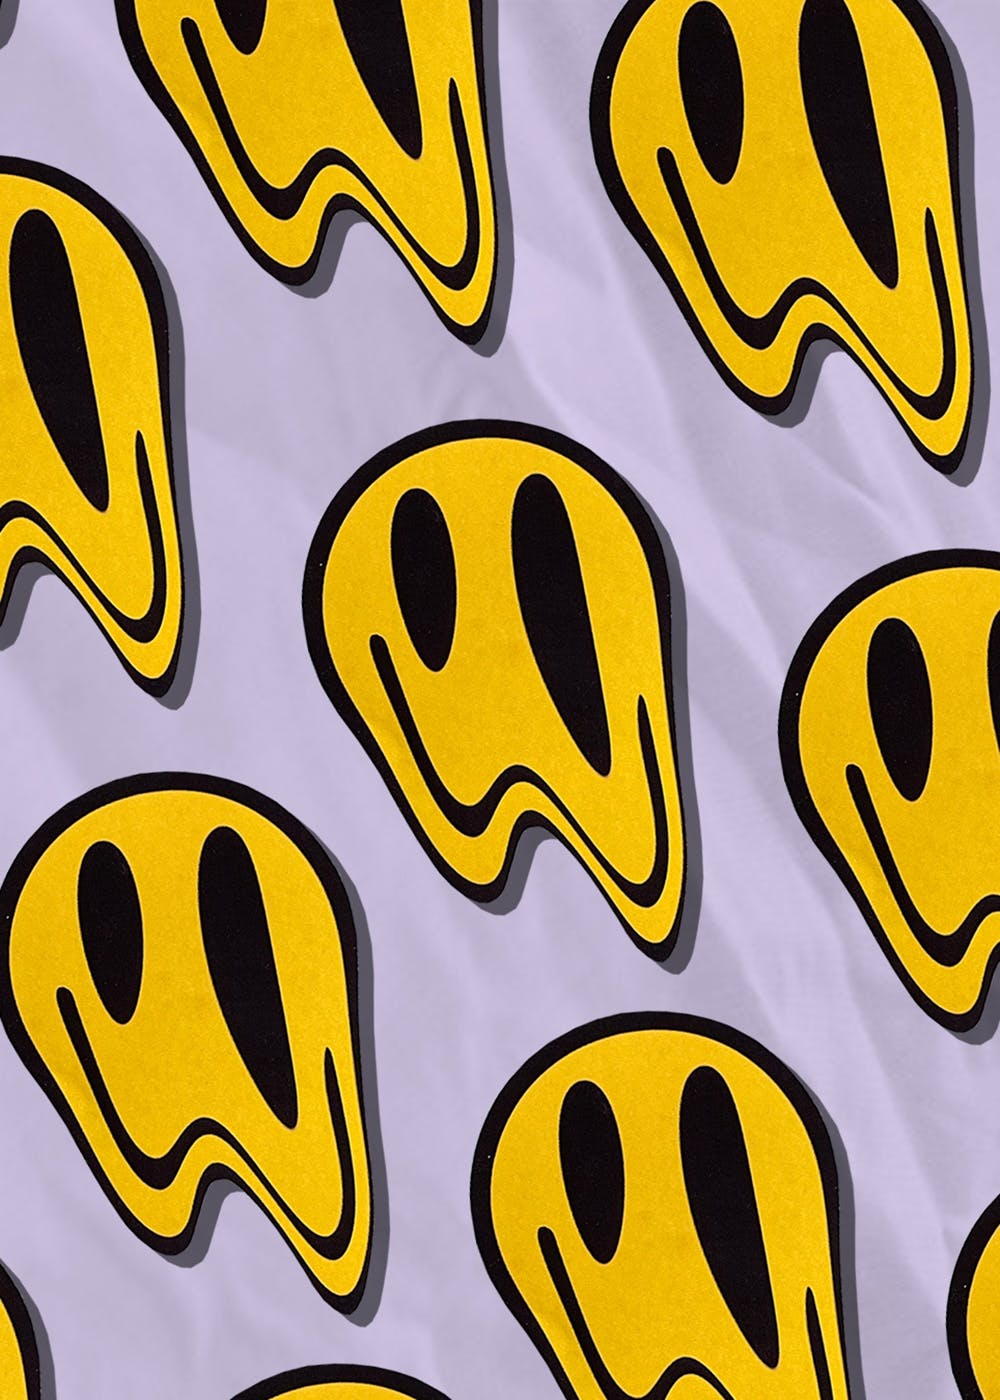 Drippy Smiley Faces Wallpapers  Wallpaper Cave